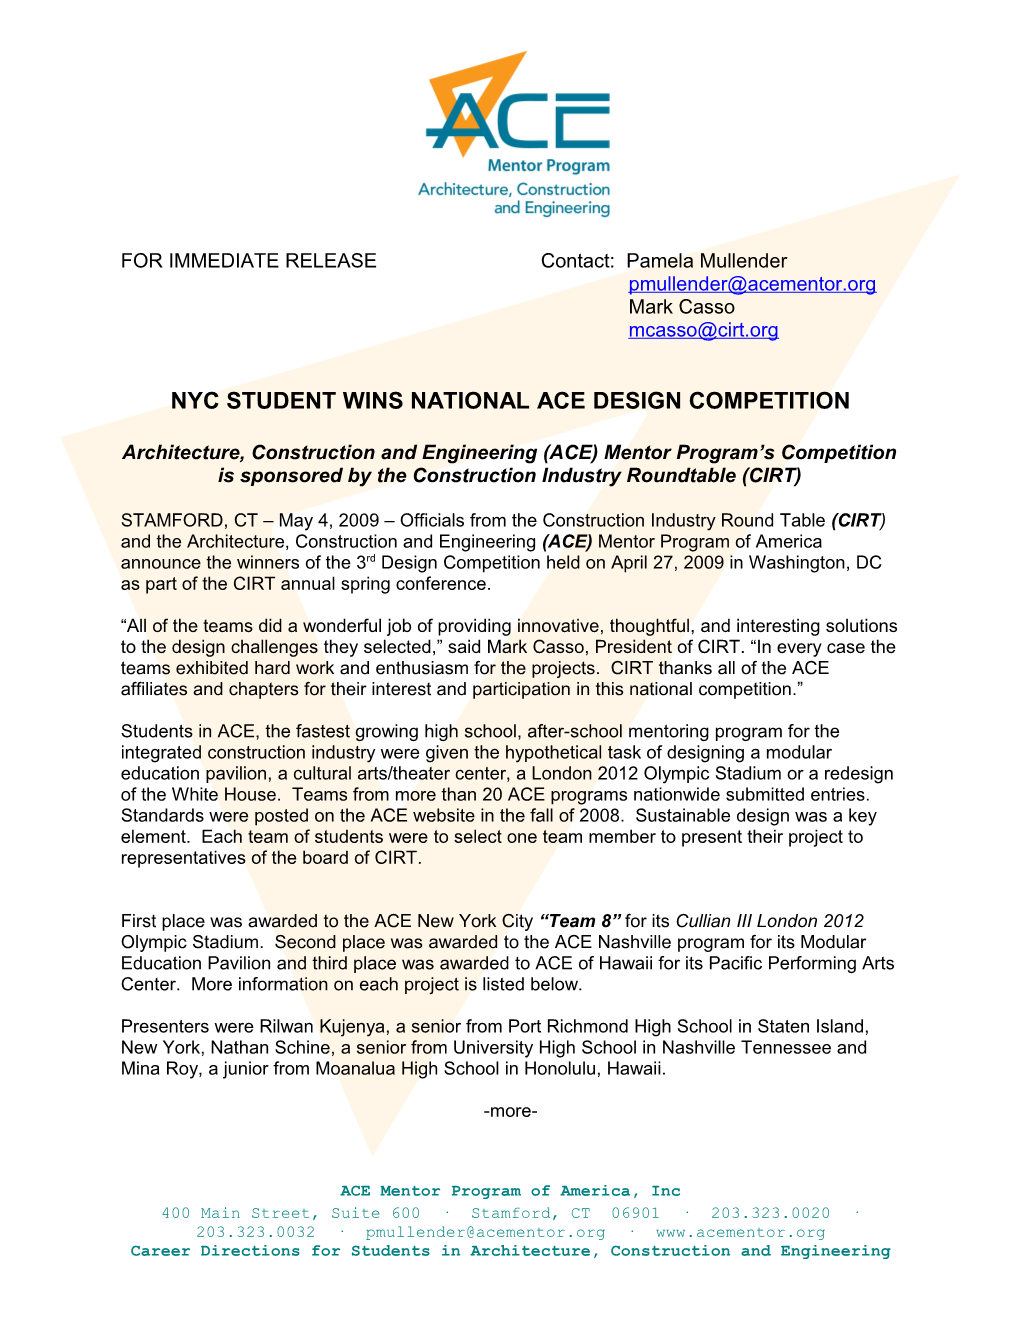 Nyc Student Wins National Ace Design Competition